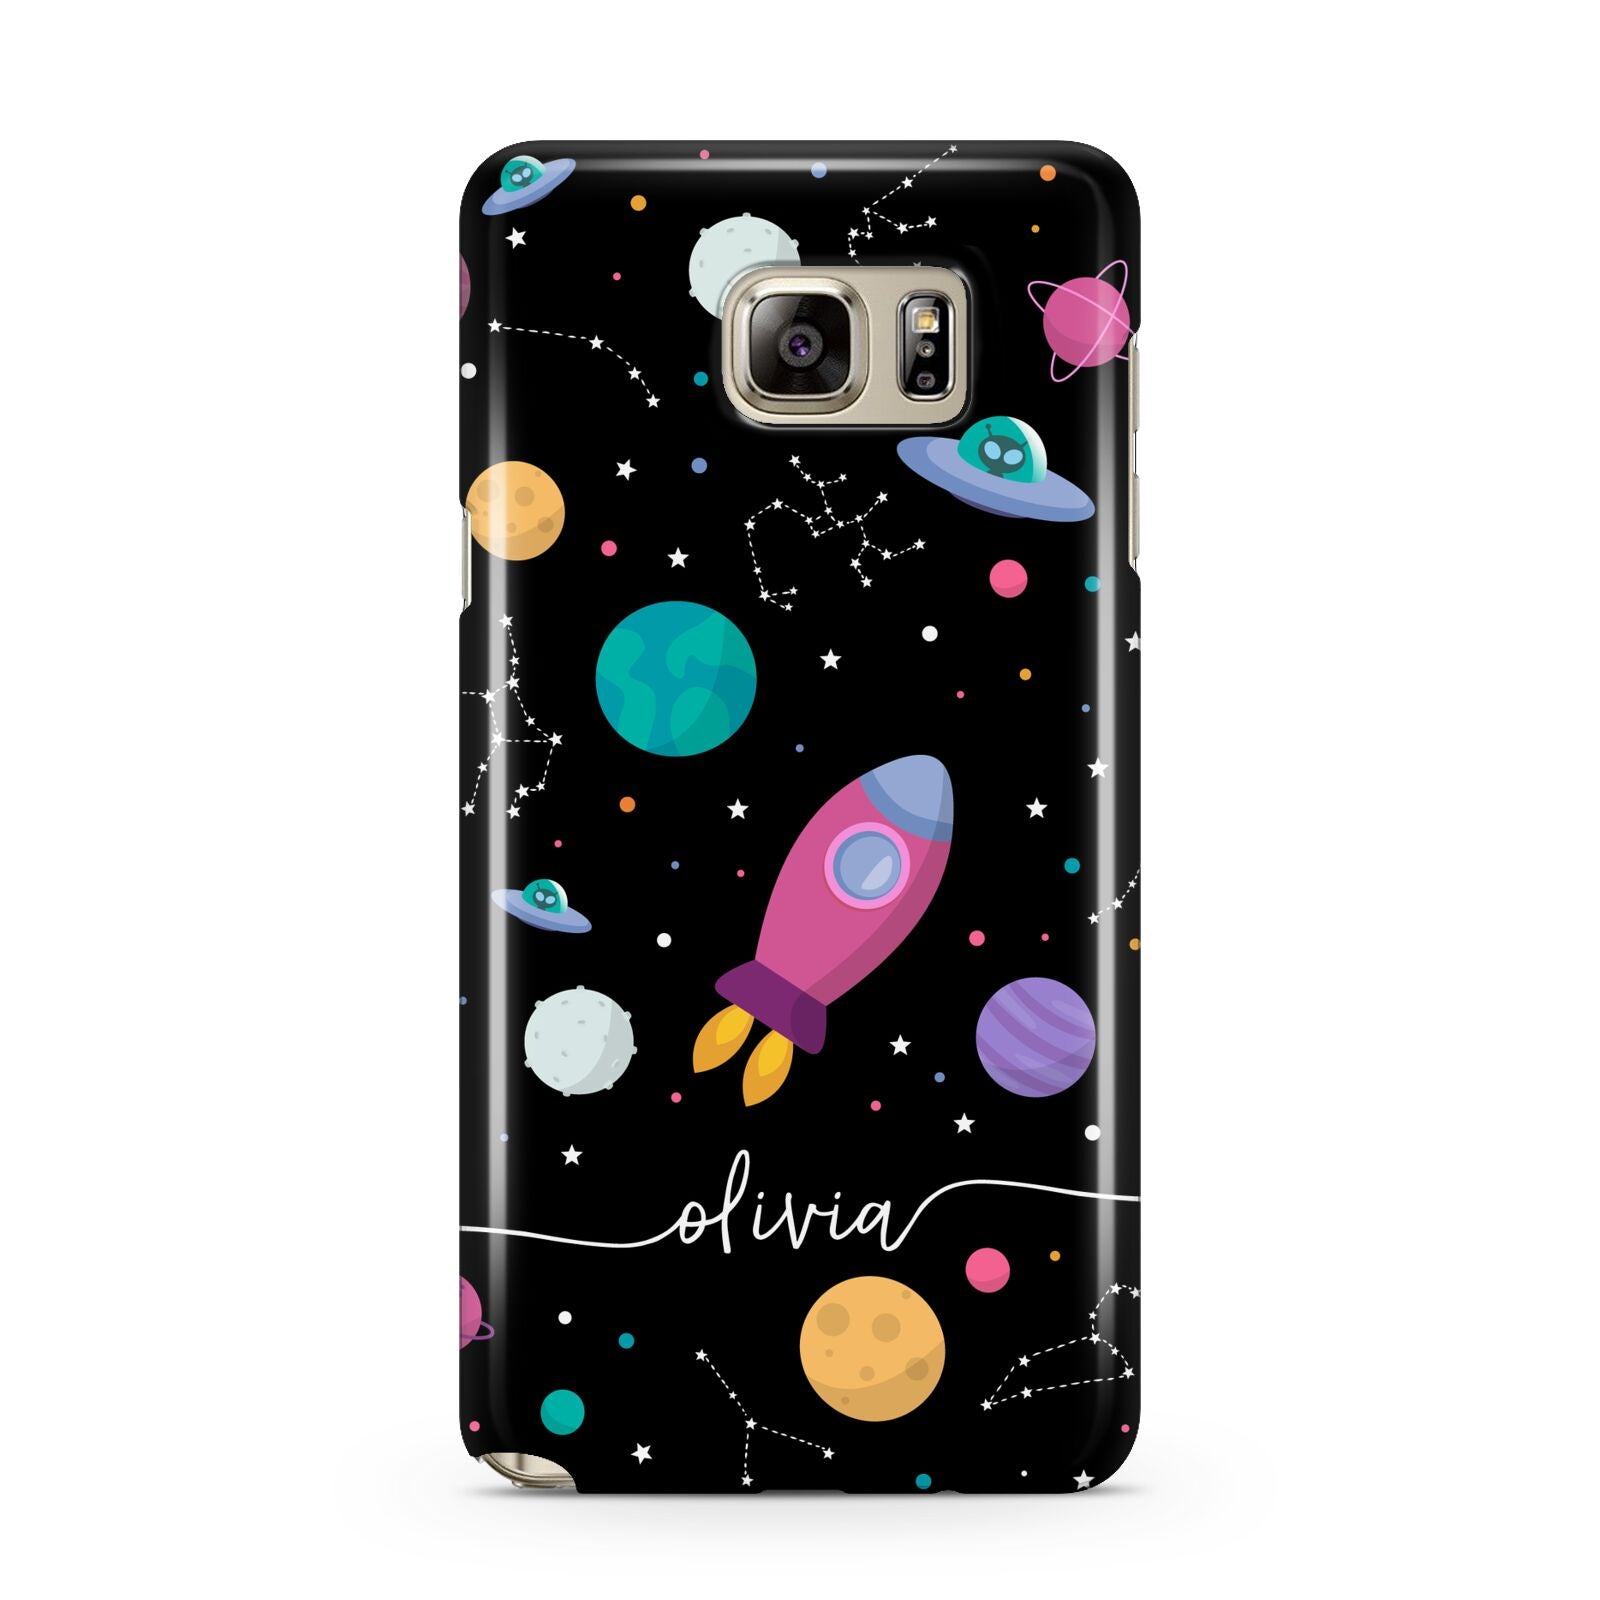 Galaxy Artwork with Name Samsung Galaxy Note 5 Case